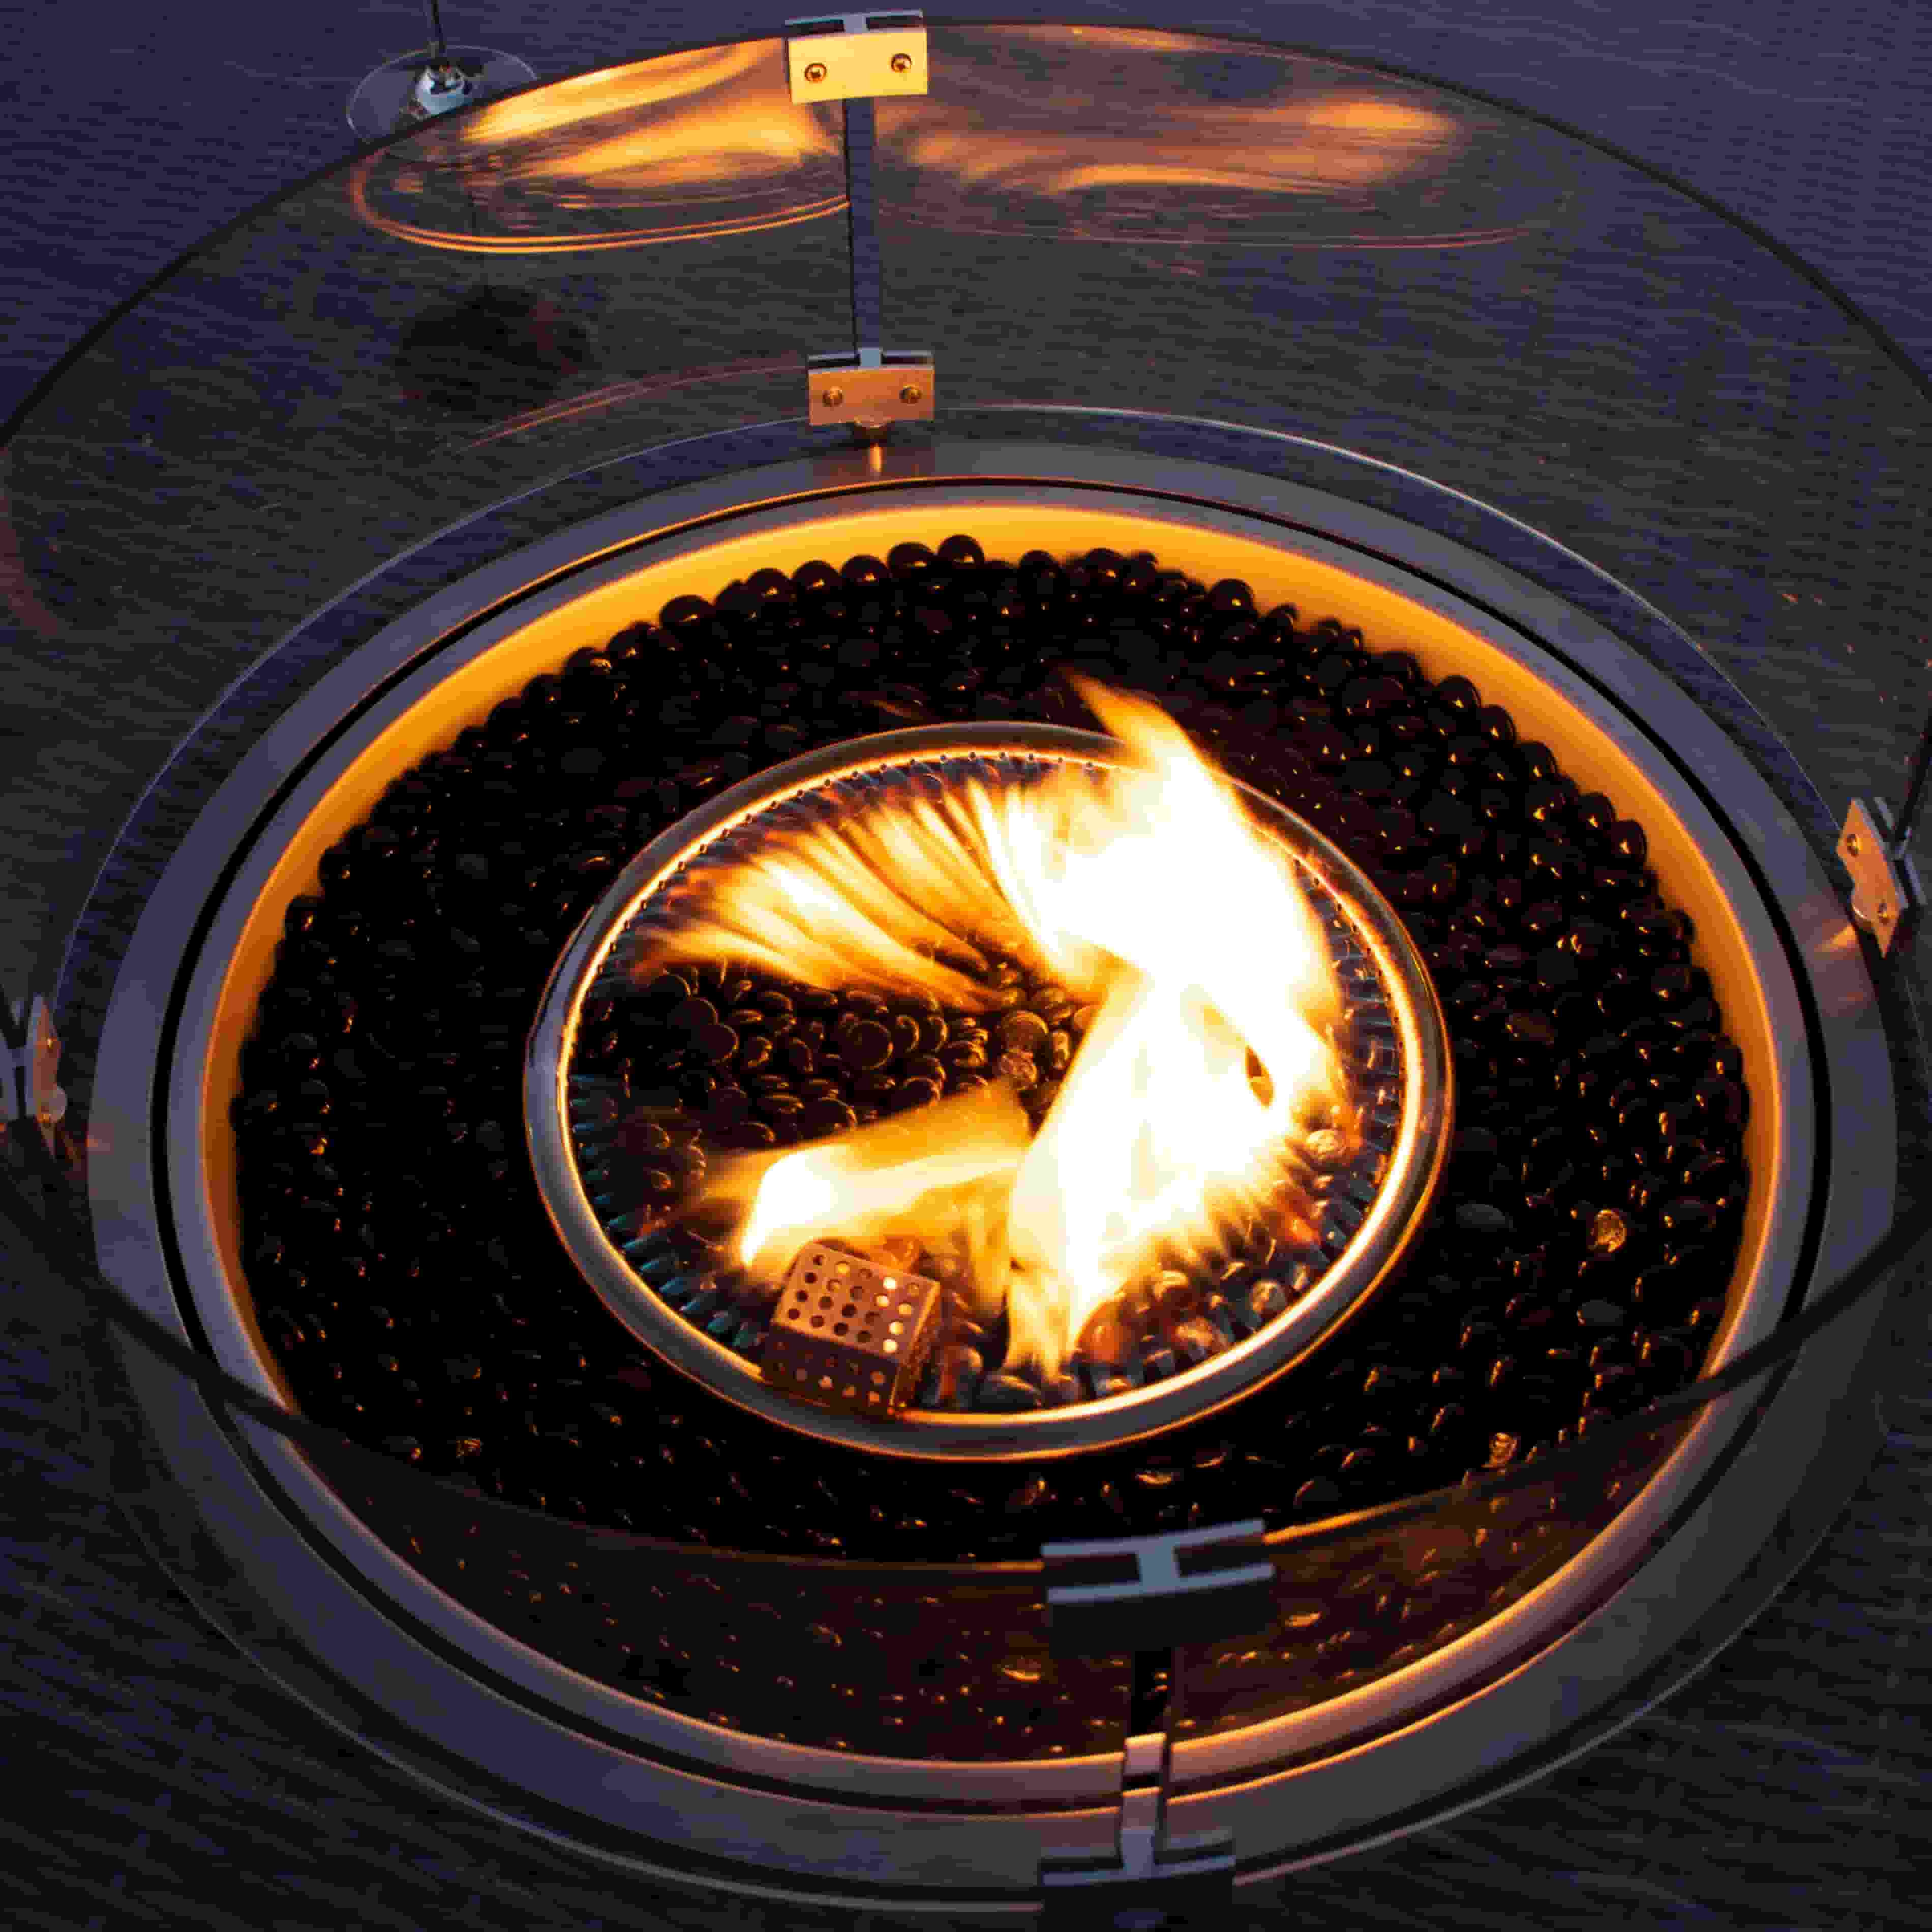 Close up of the fire pit and glass surround